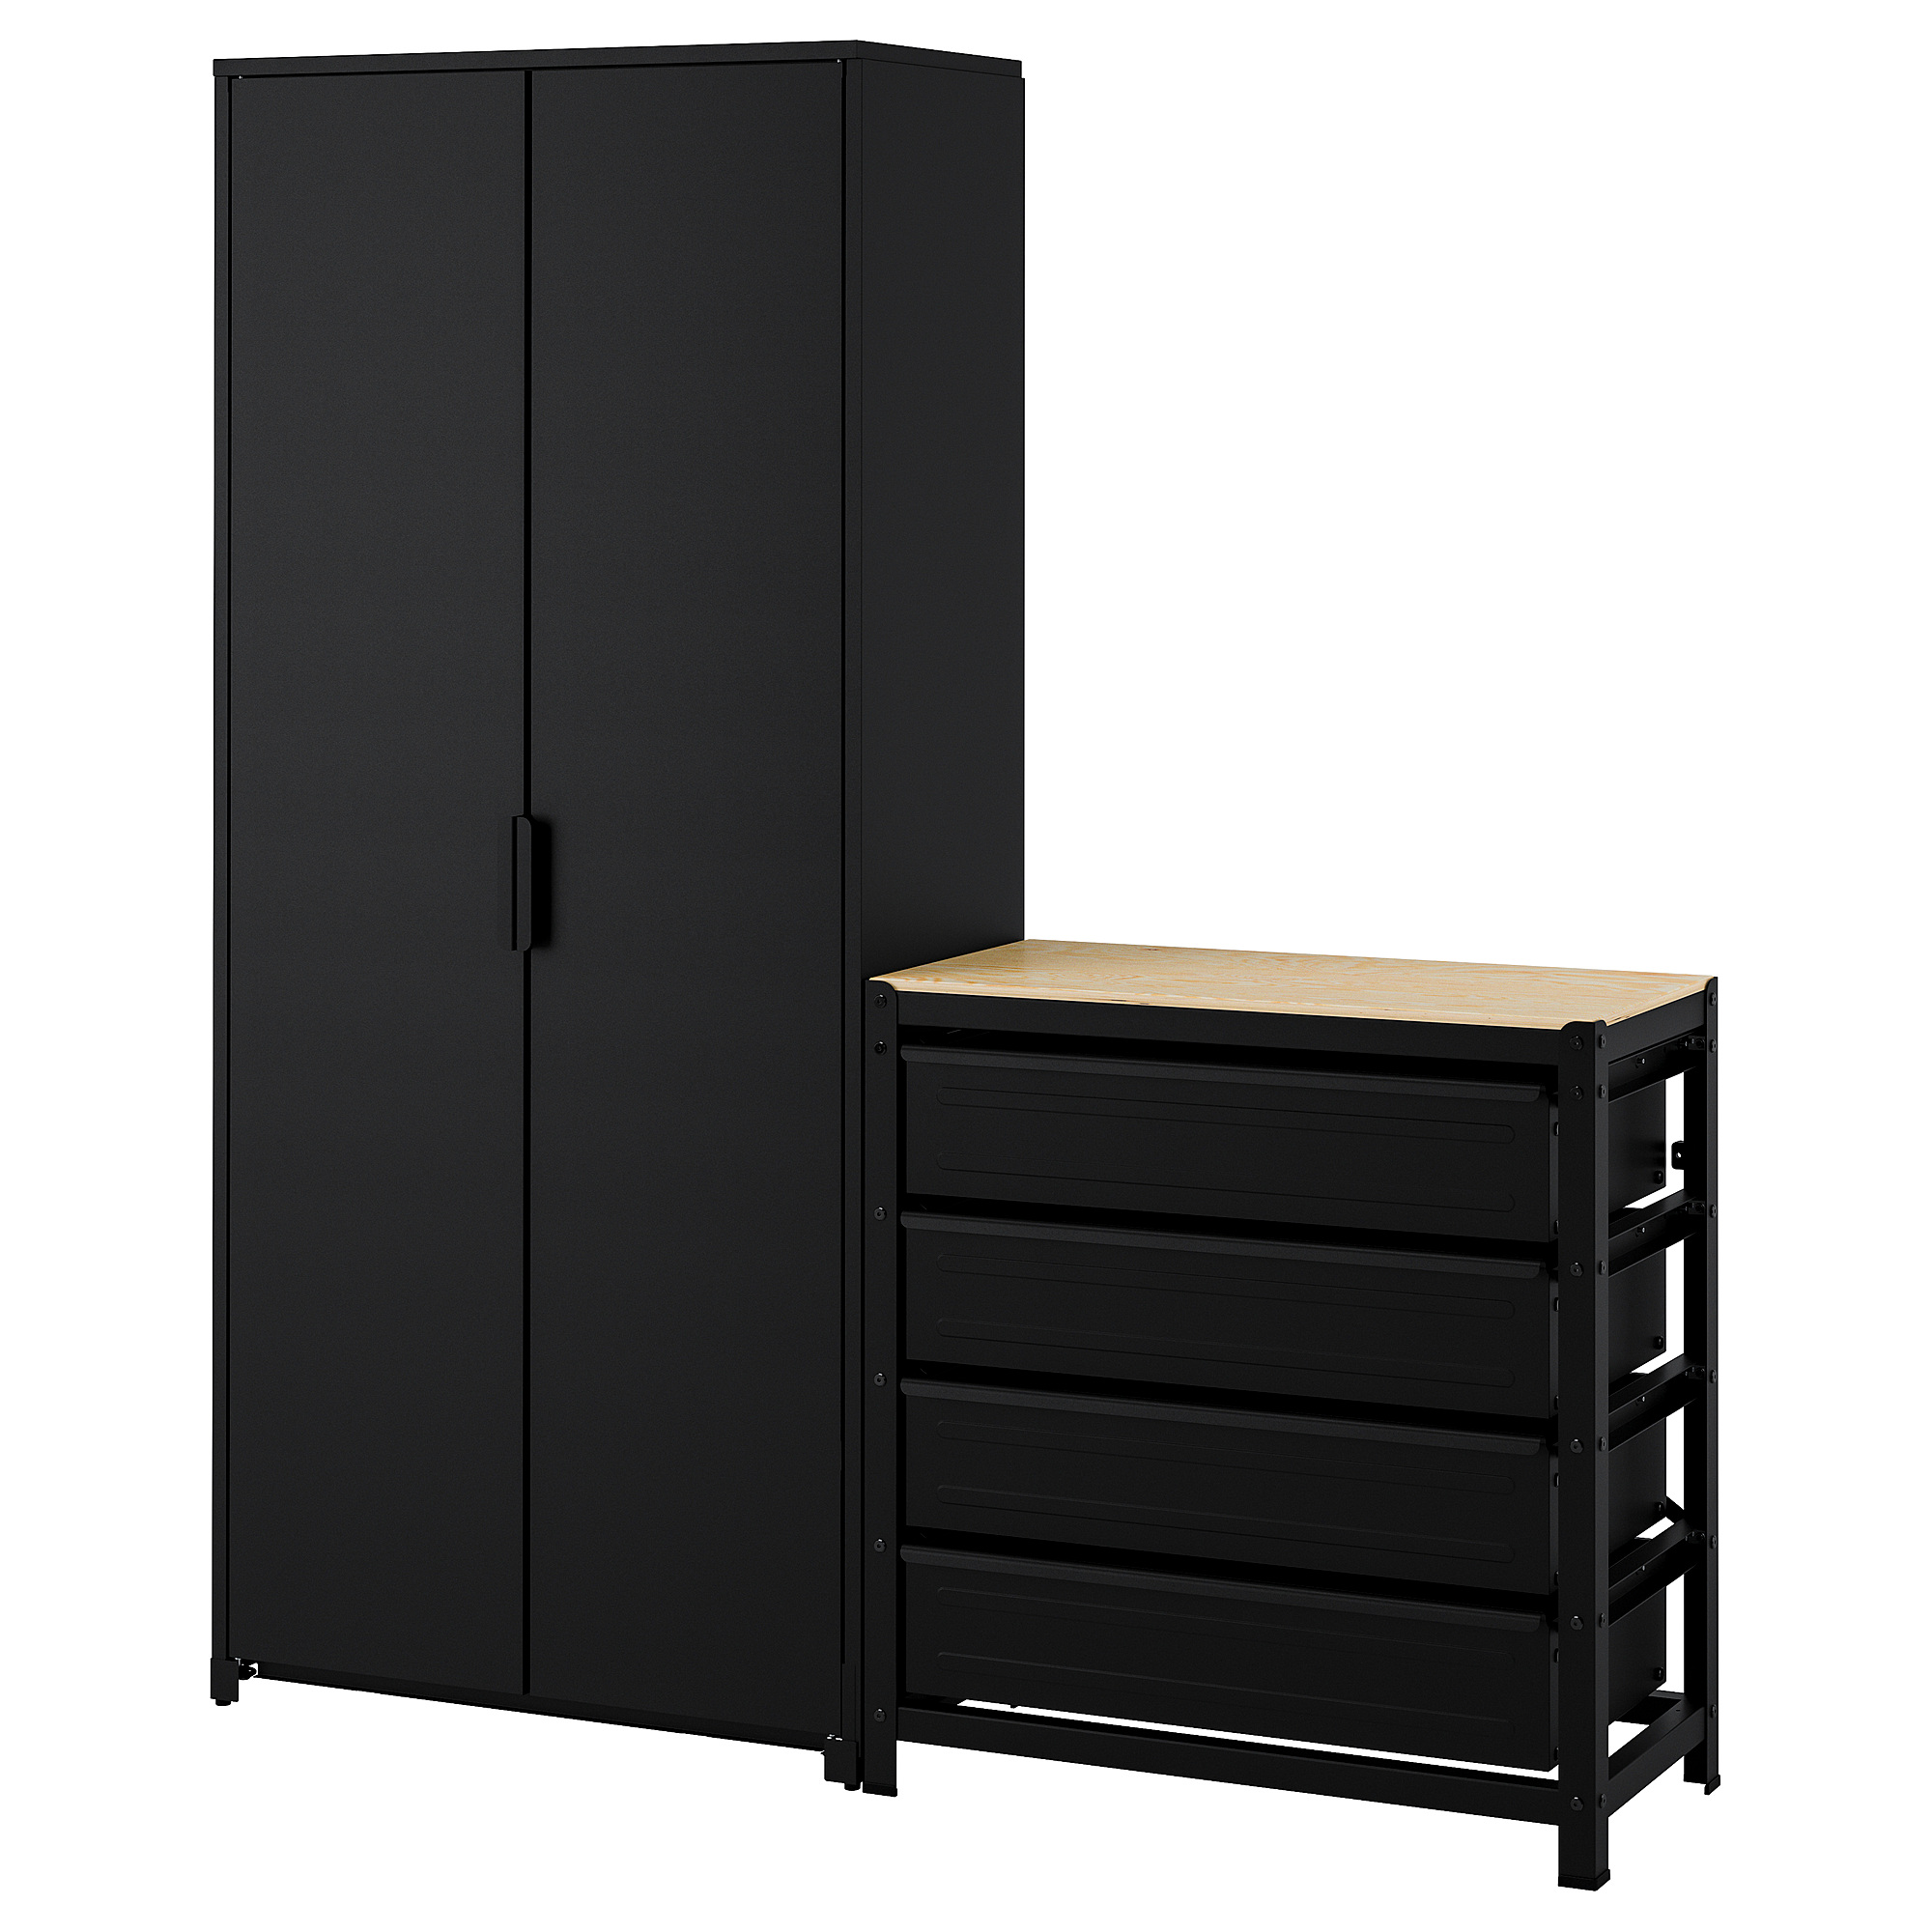 BROR shelving unit w cabinets/drawers